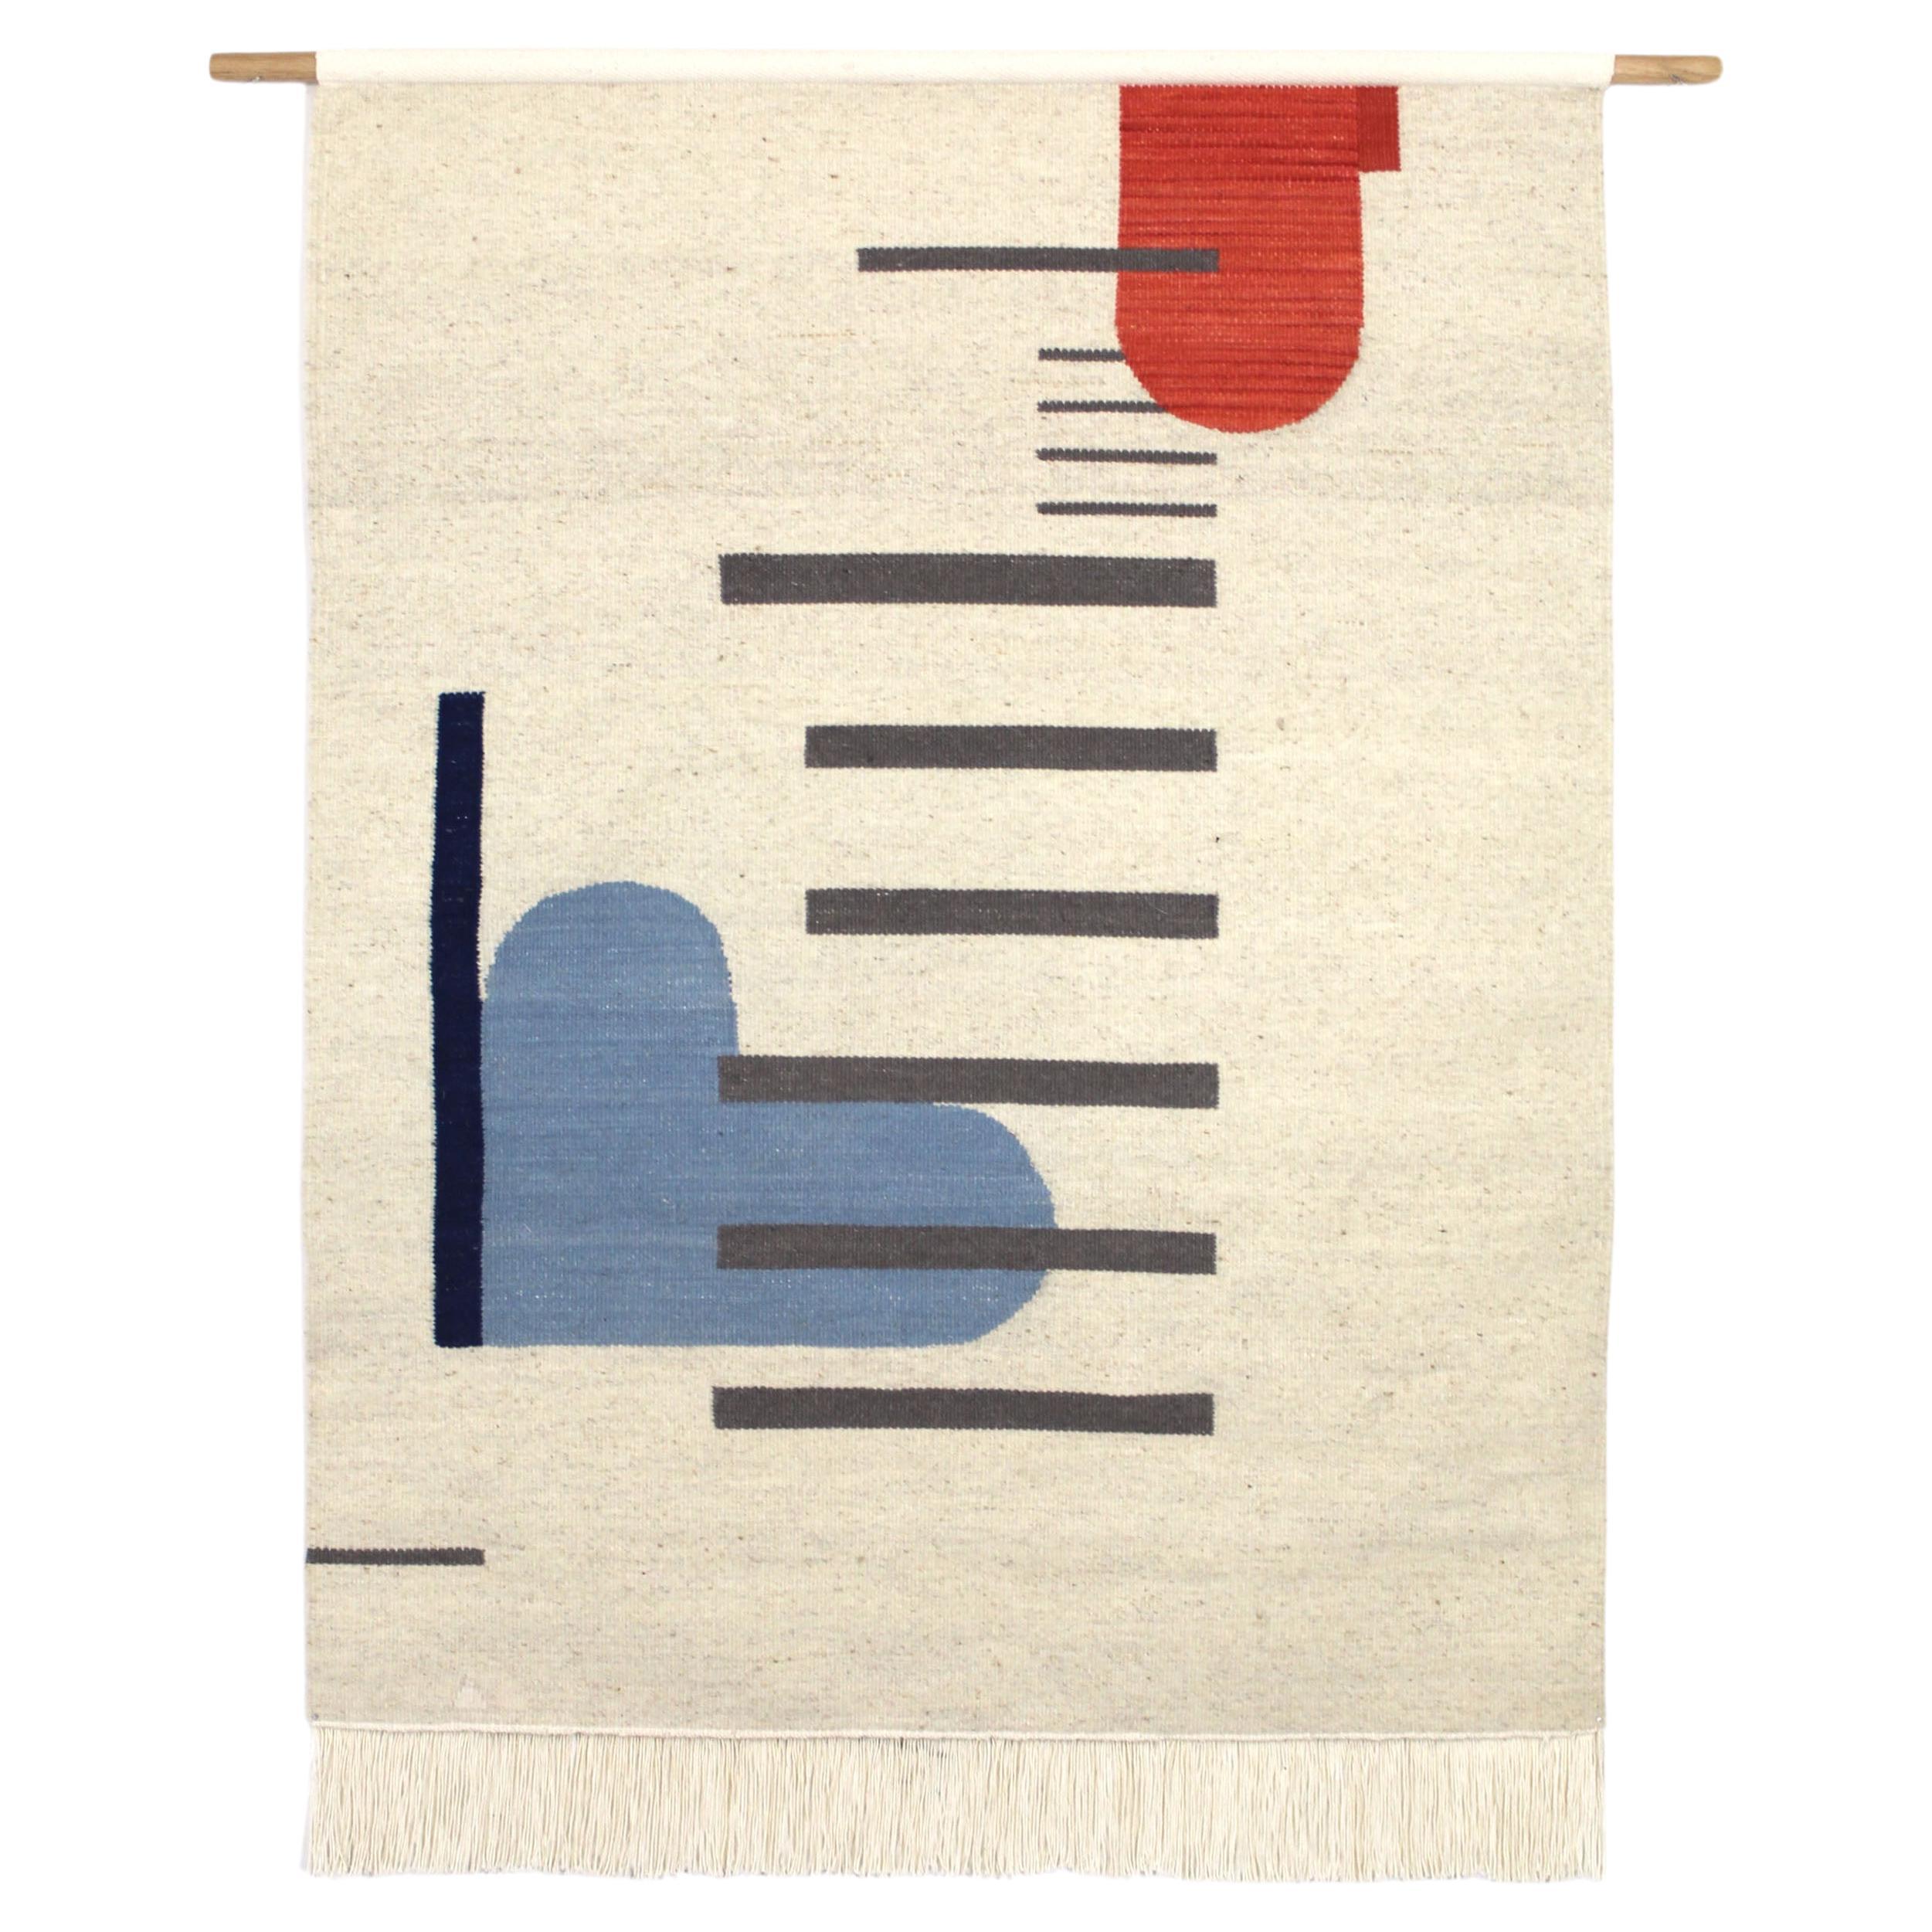 Boos Wool Tapestry, Contemporary Wall Hanging, Naturally Dyed and Handwoven